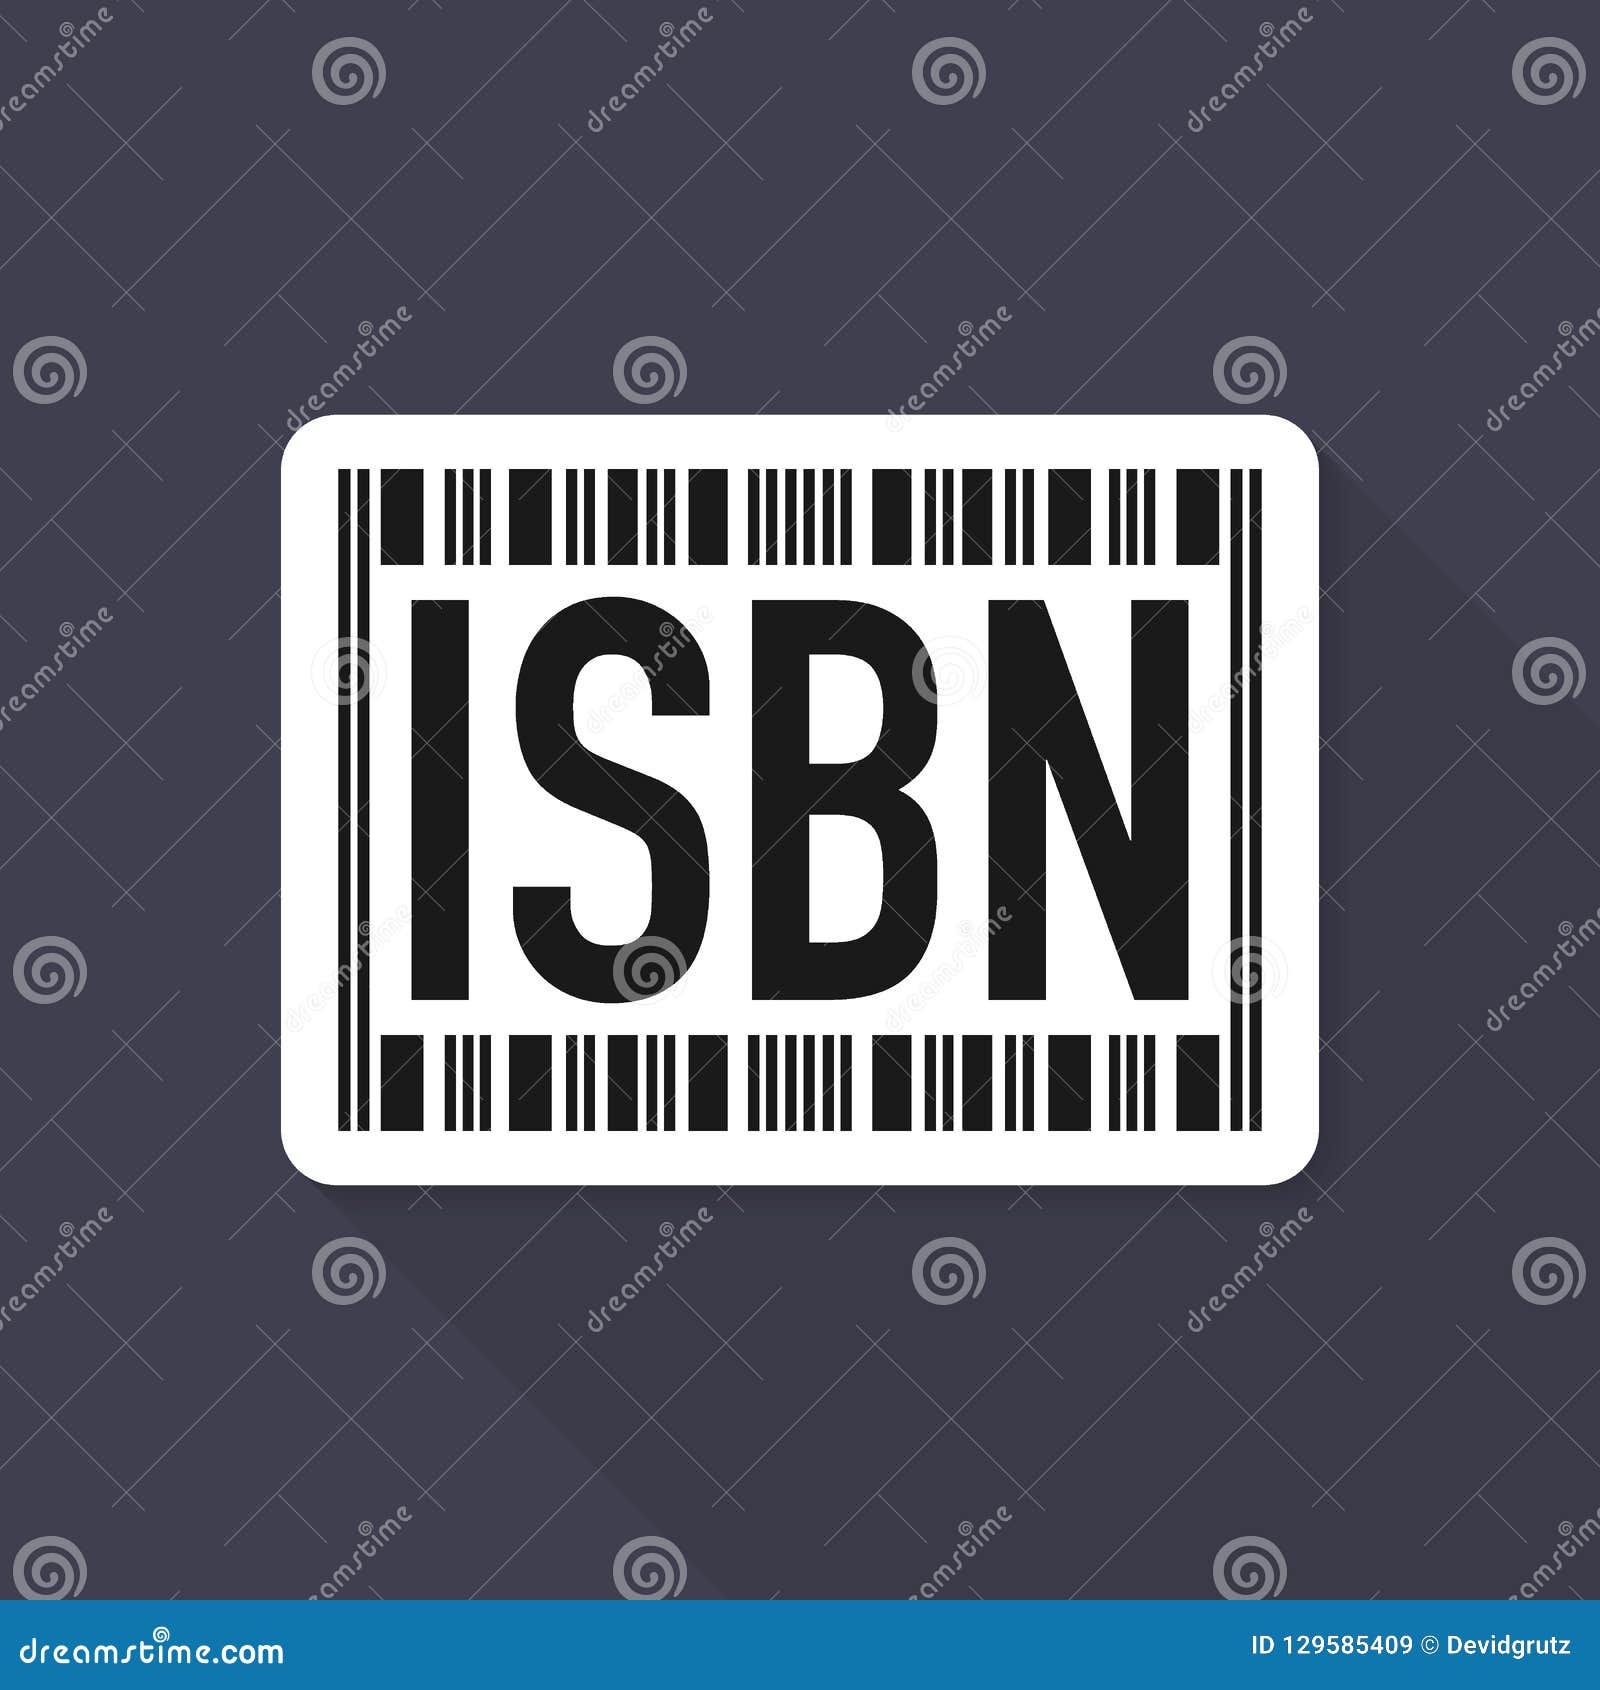 black isbn sign with barcode. concept of scanning, identifying, brochure key, international publishing, commerce.